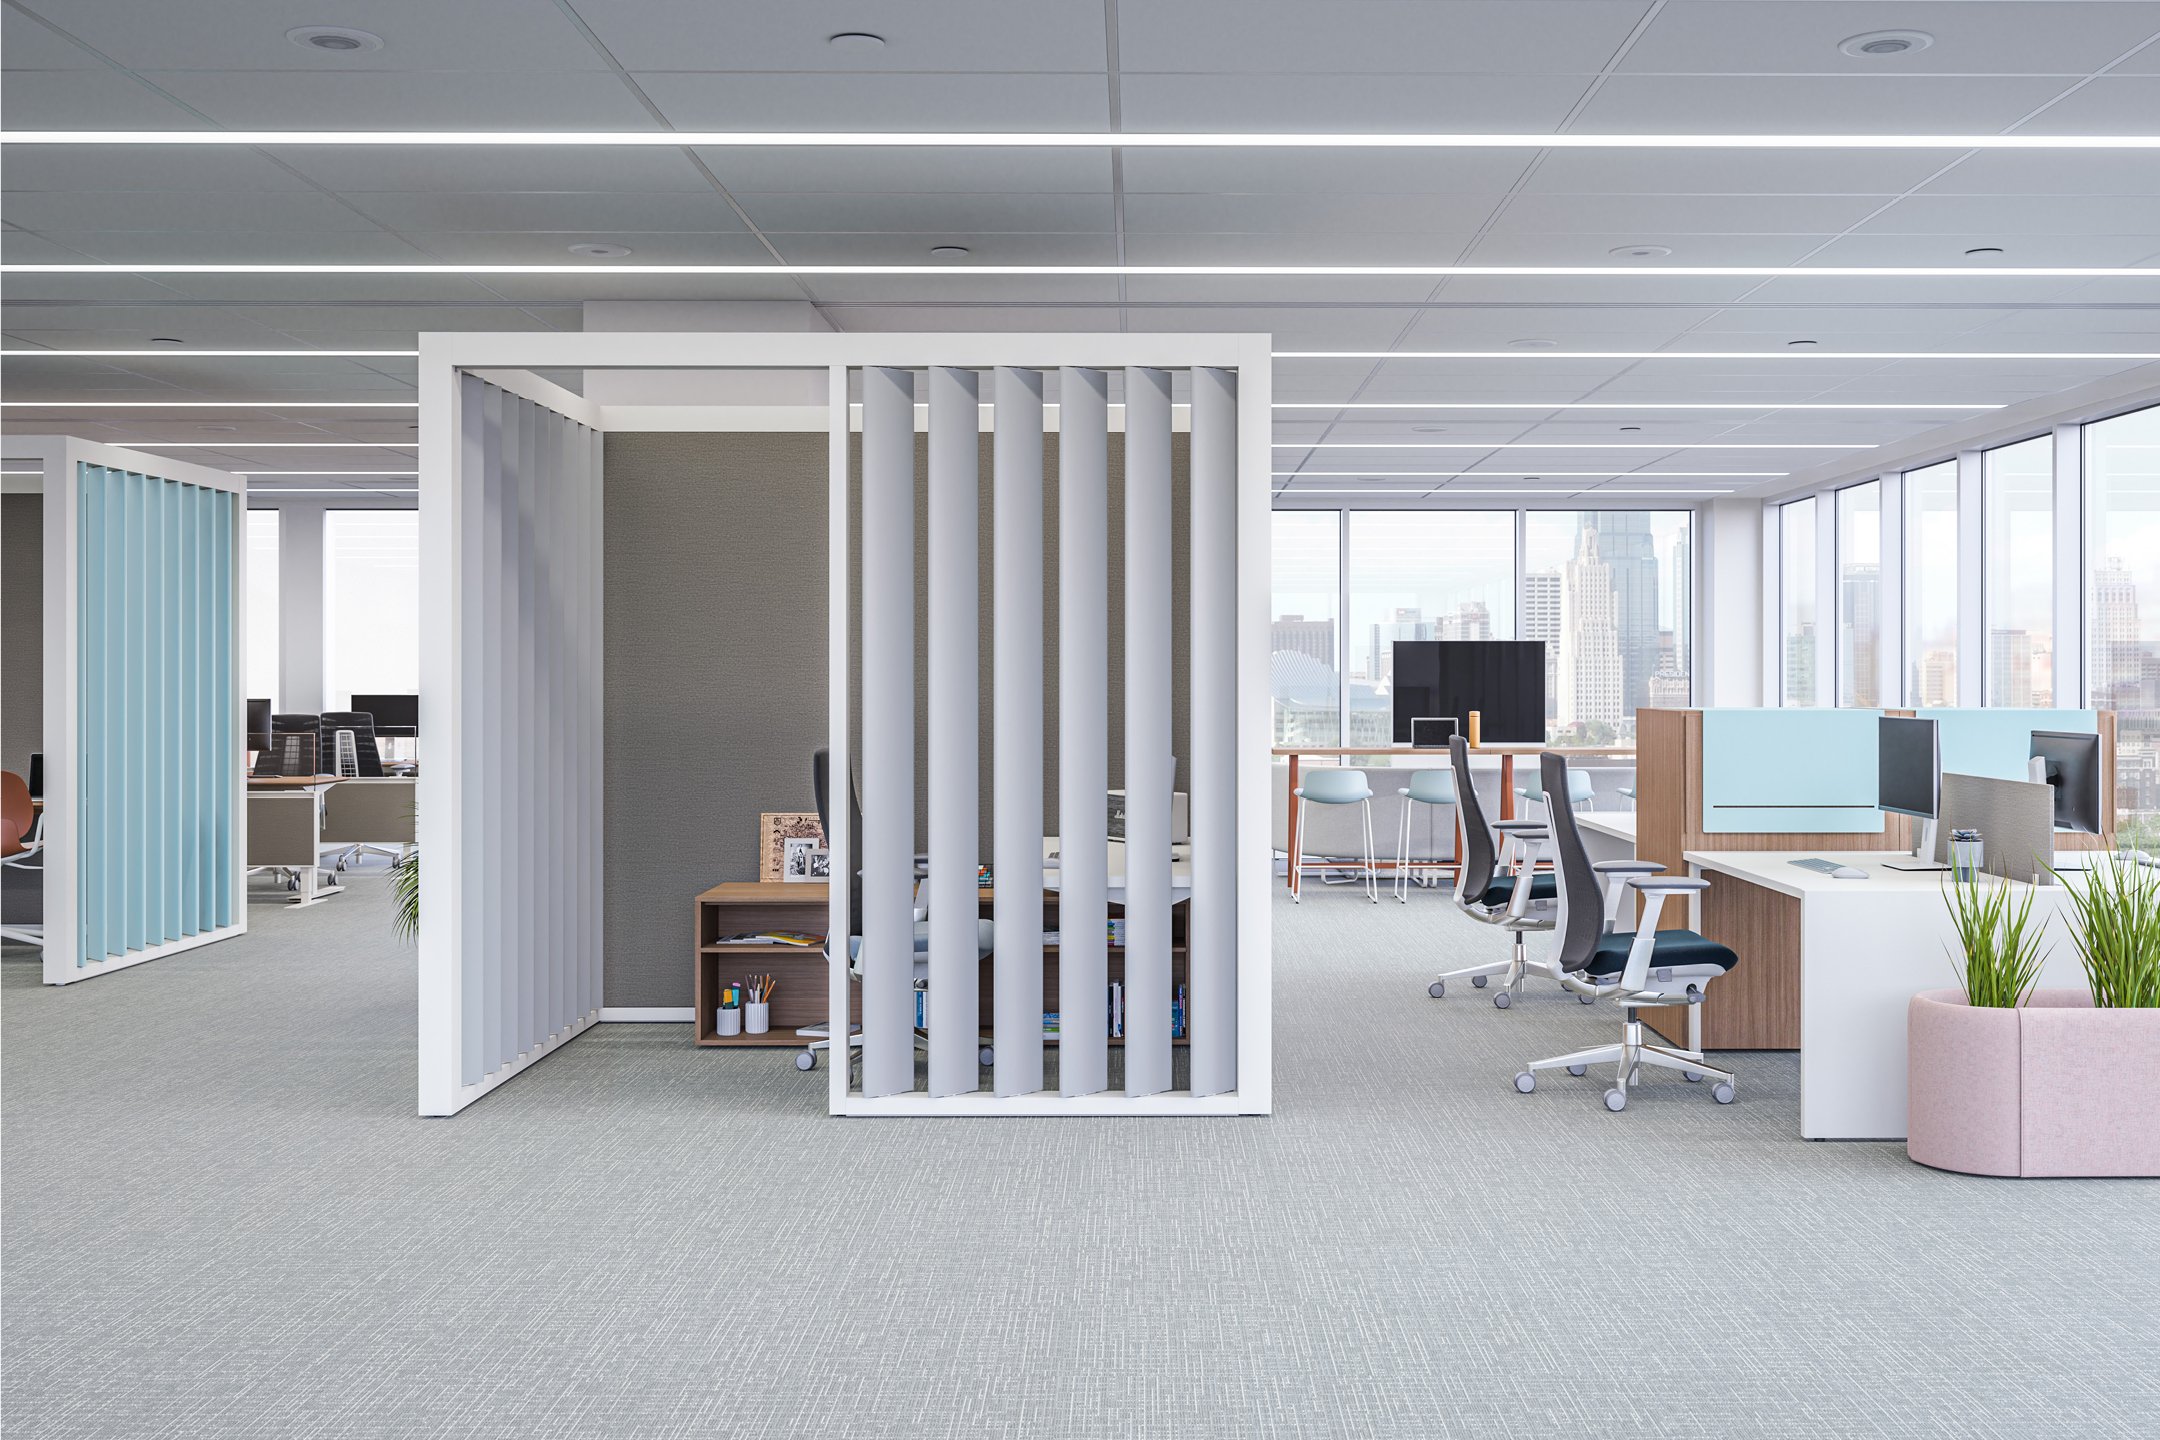 Haworth Pergola Workspace in white color for private office space in open office area with windows that look out into city